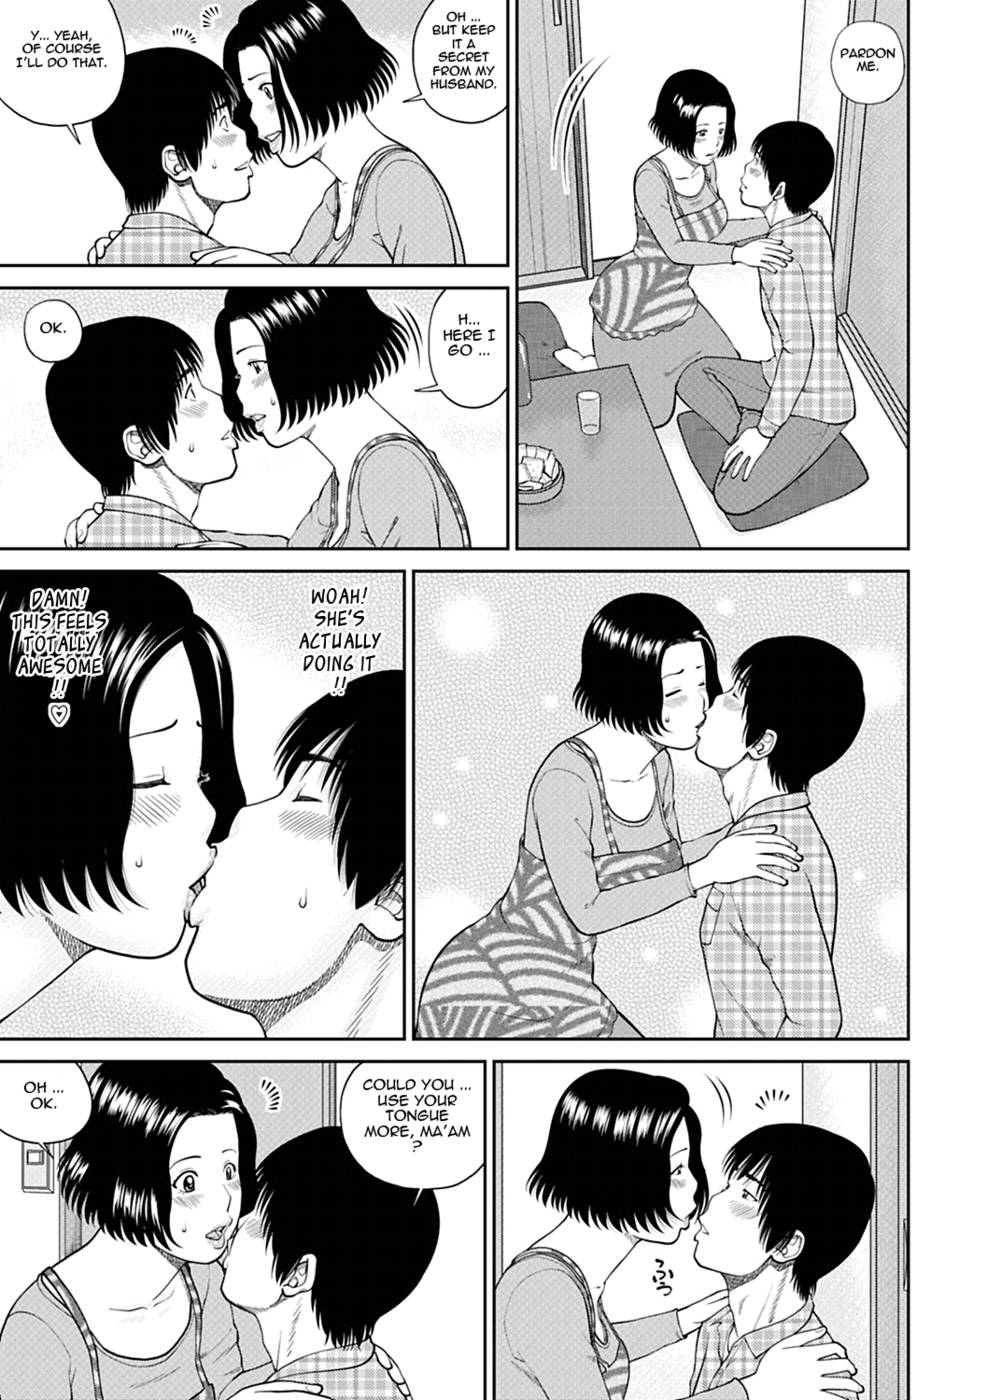 Hentai Manga Comic-34 Year Old Unsatisfied Wife-Chapter 3-Entertaining Wife-First Half-7